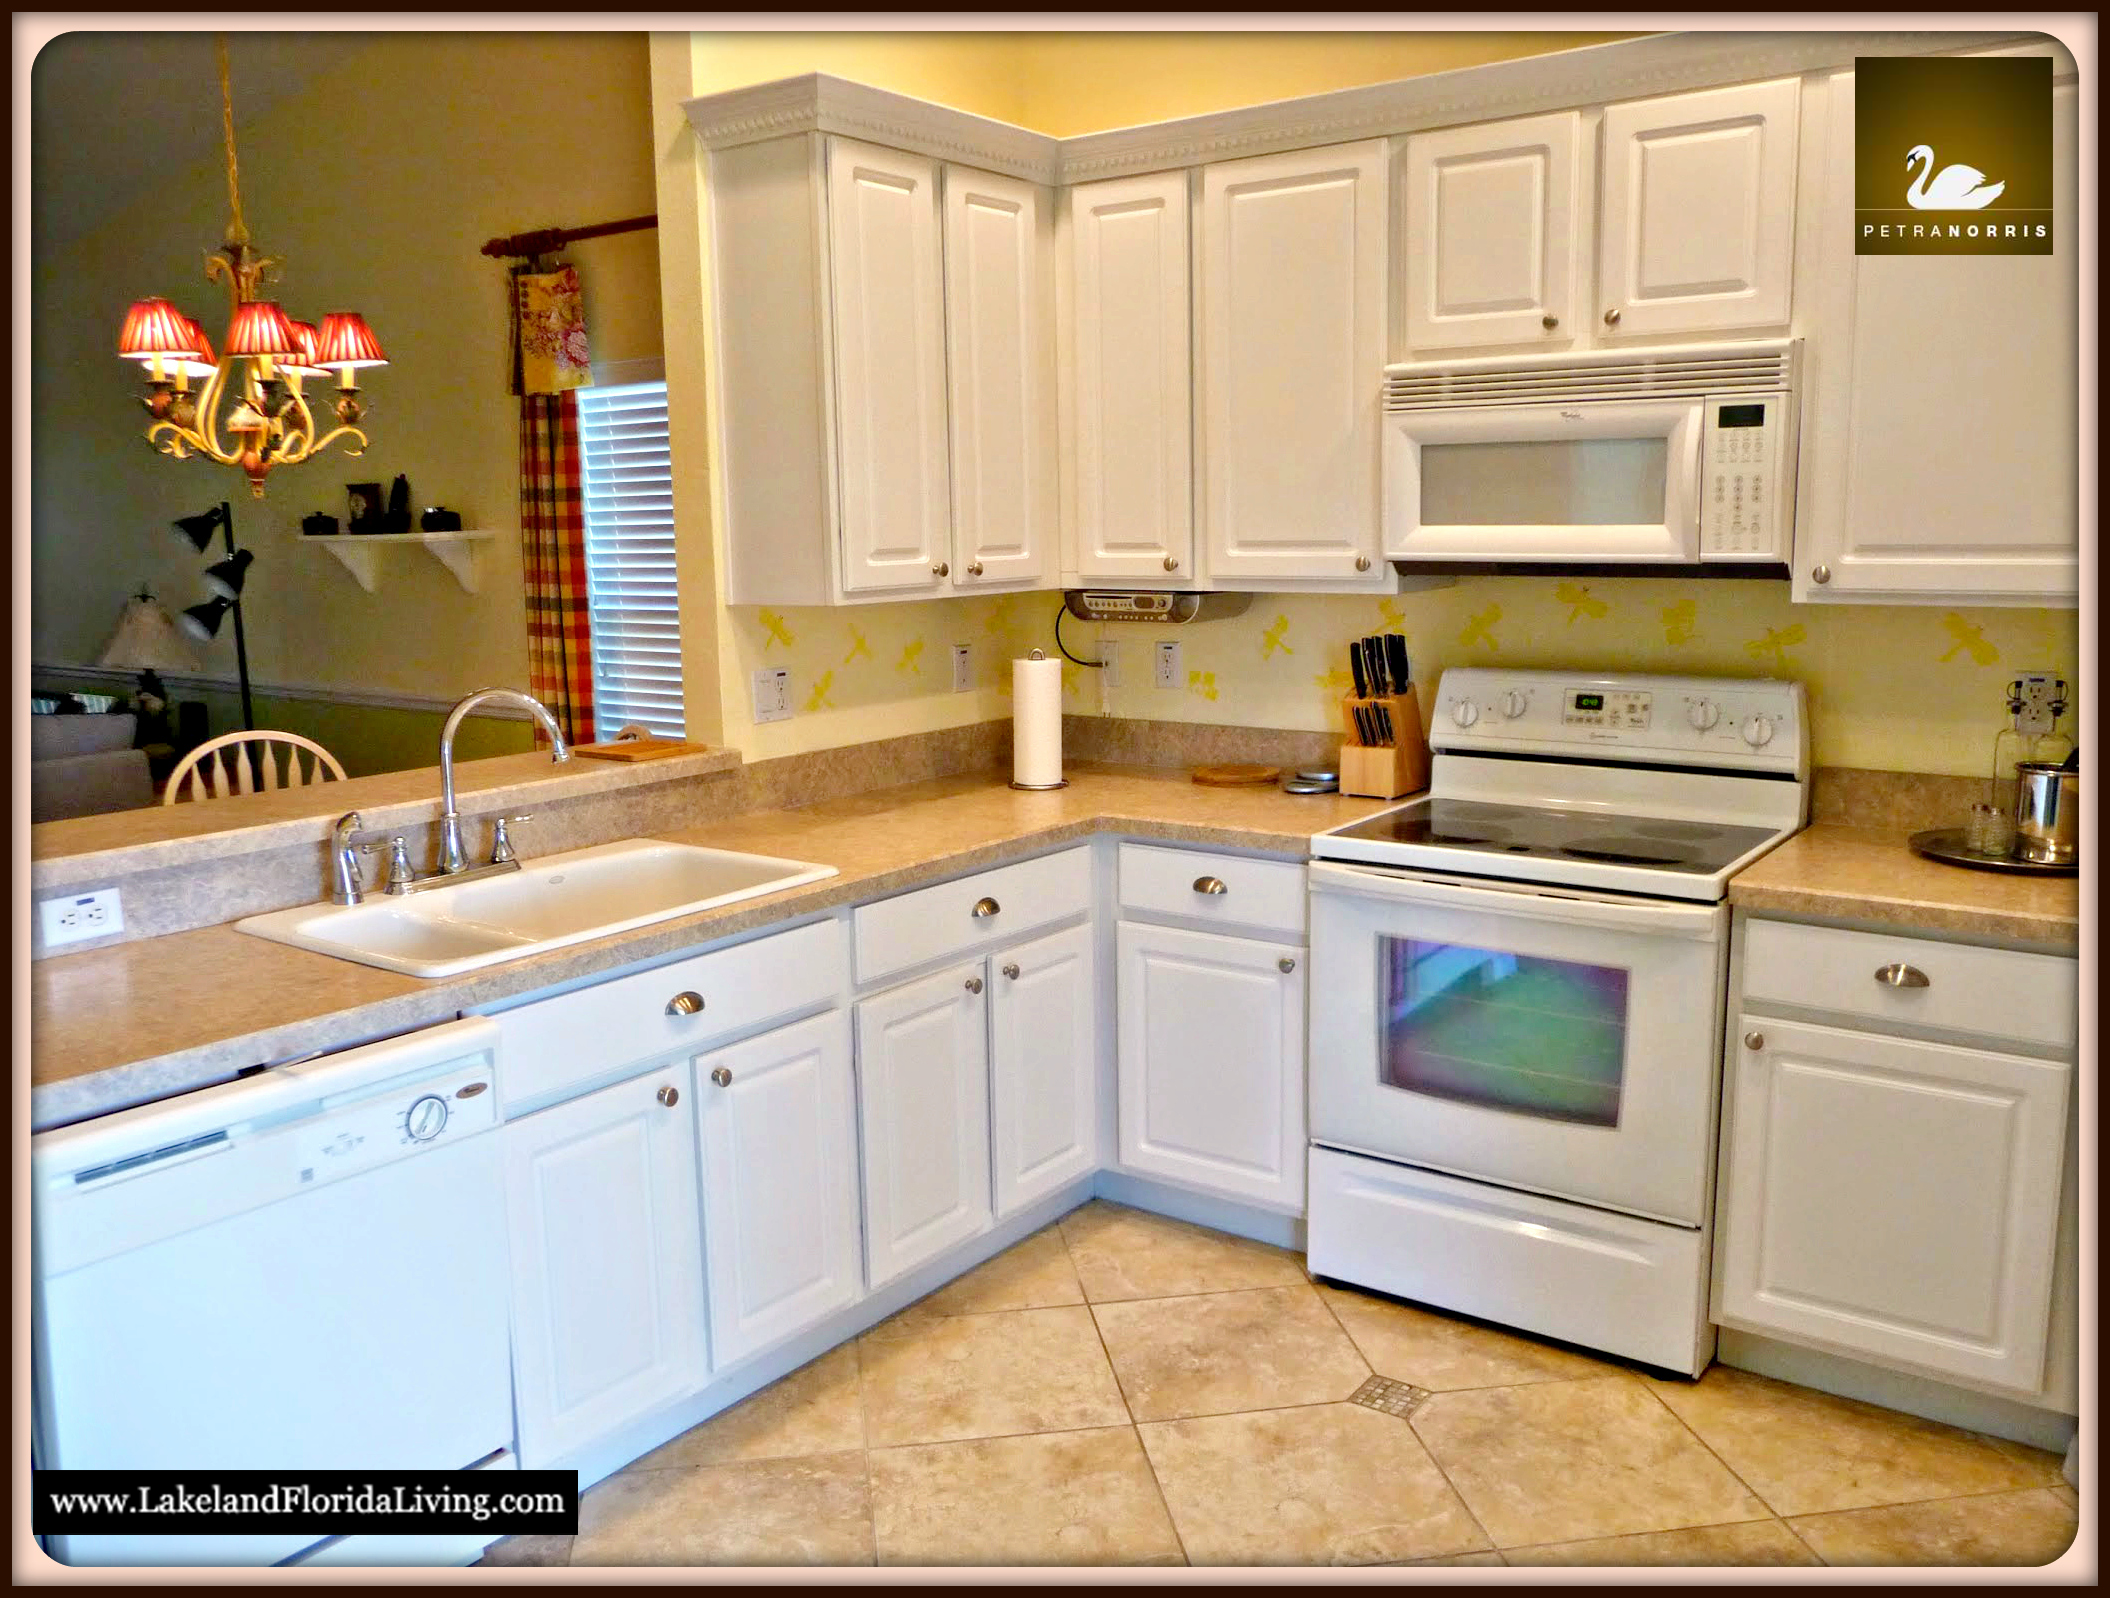 Home for Sale in Solivita Community FL - 213 Grand Canal Dr - 005 Kitchen 1